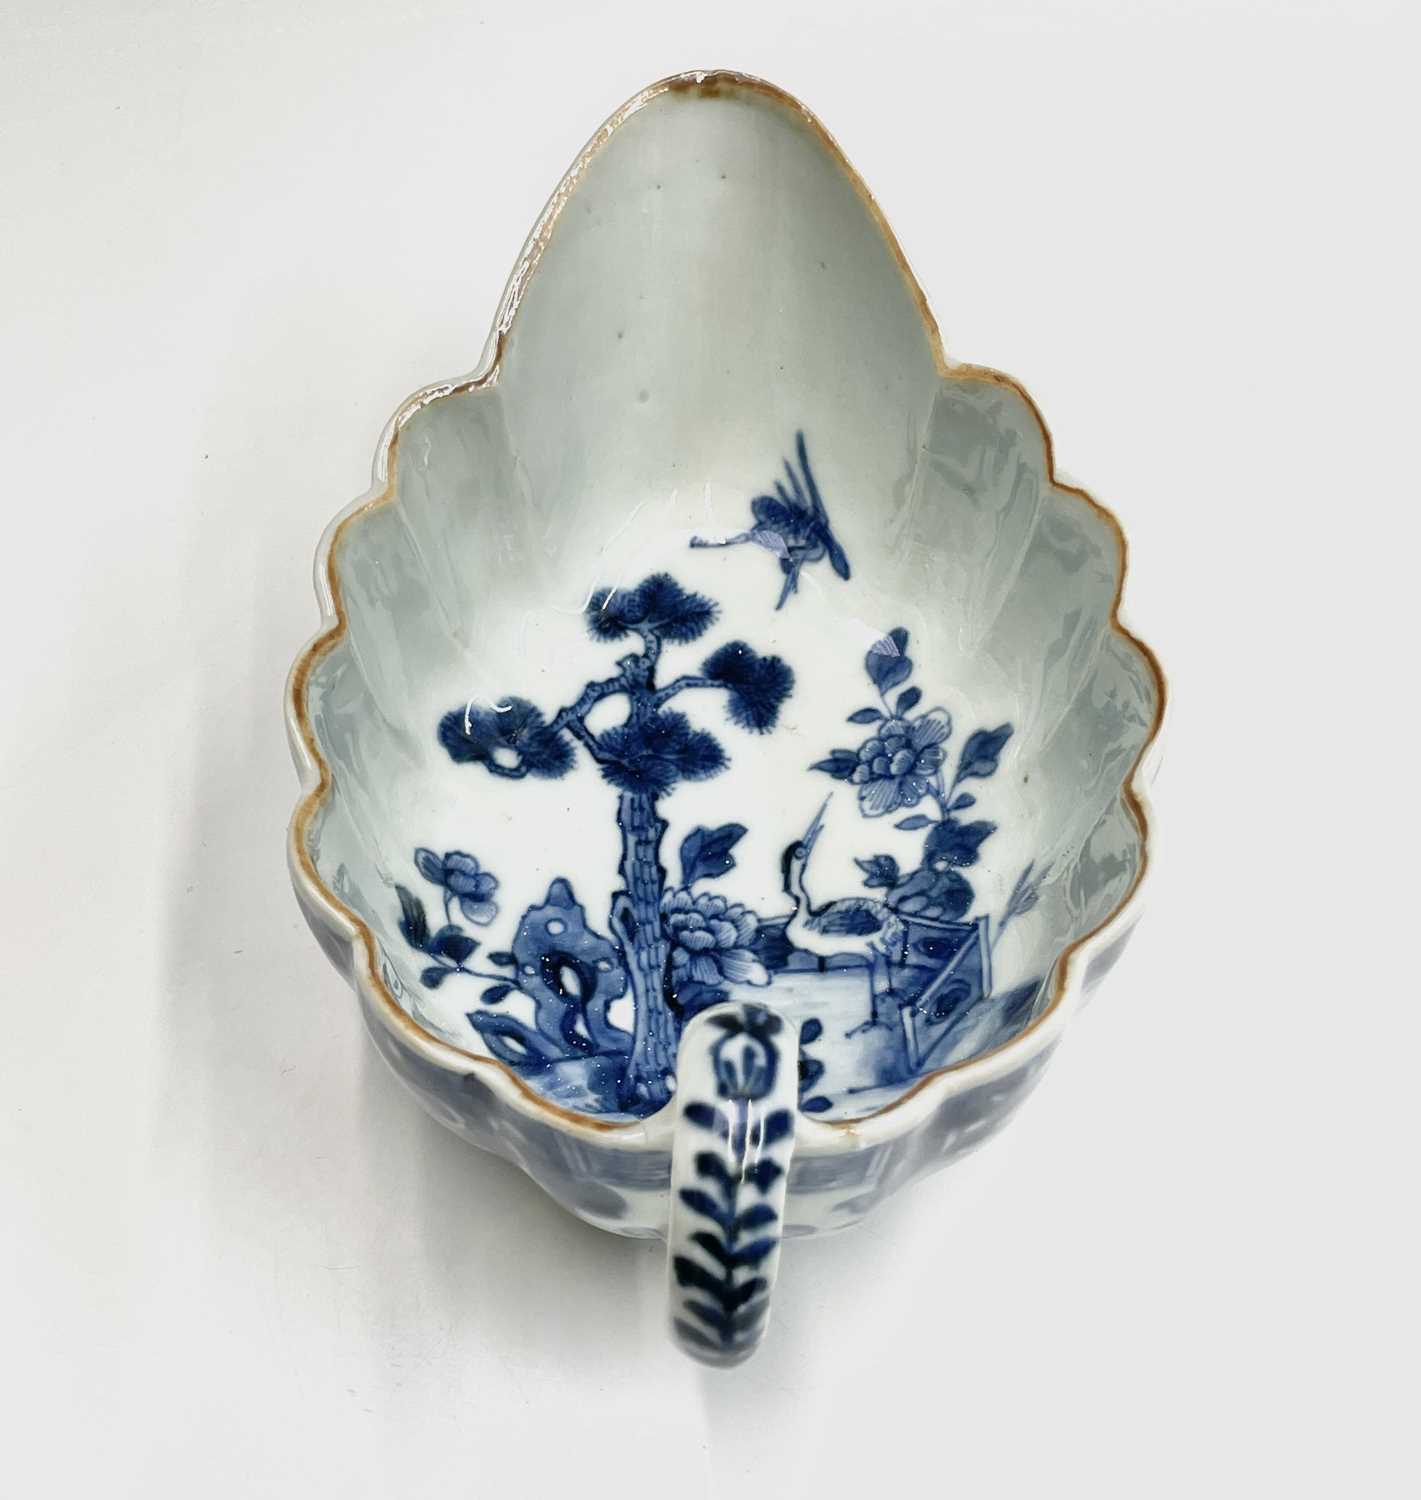 A Chinese Export porcelain sauce boat, 18th century, the interior with birds, a tree and flowers - Image 6 of 6